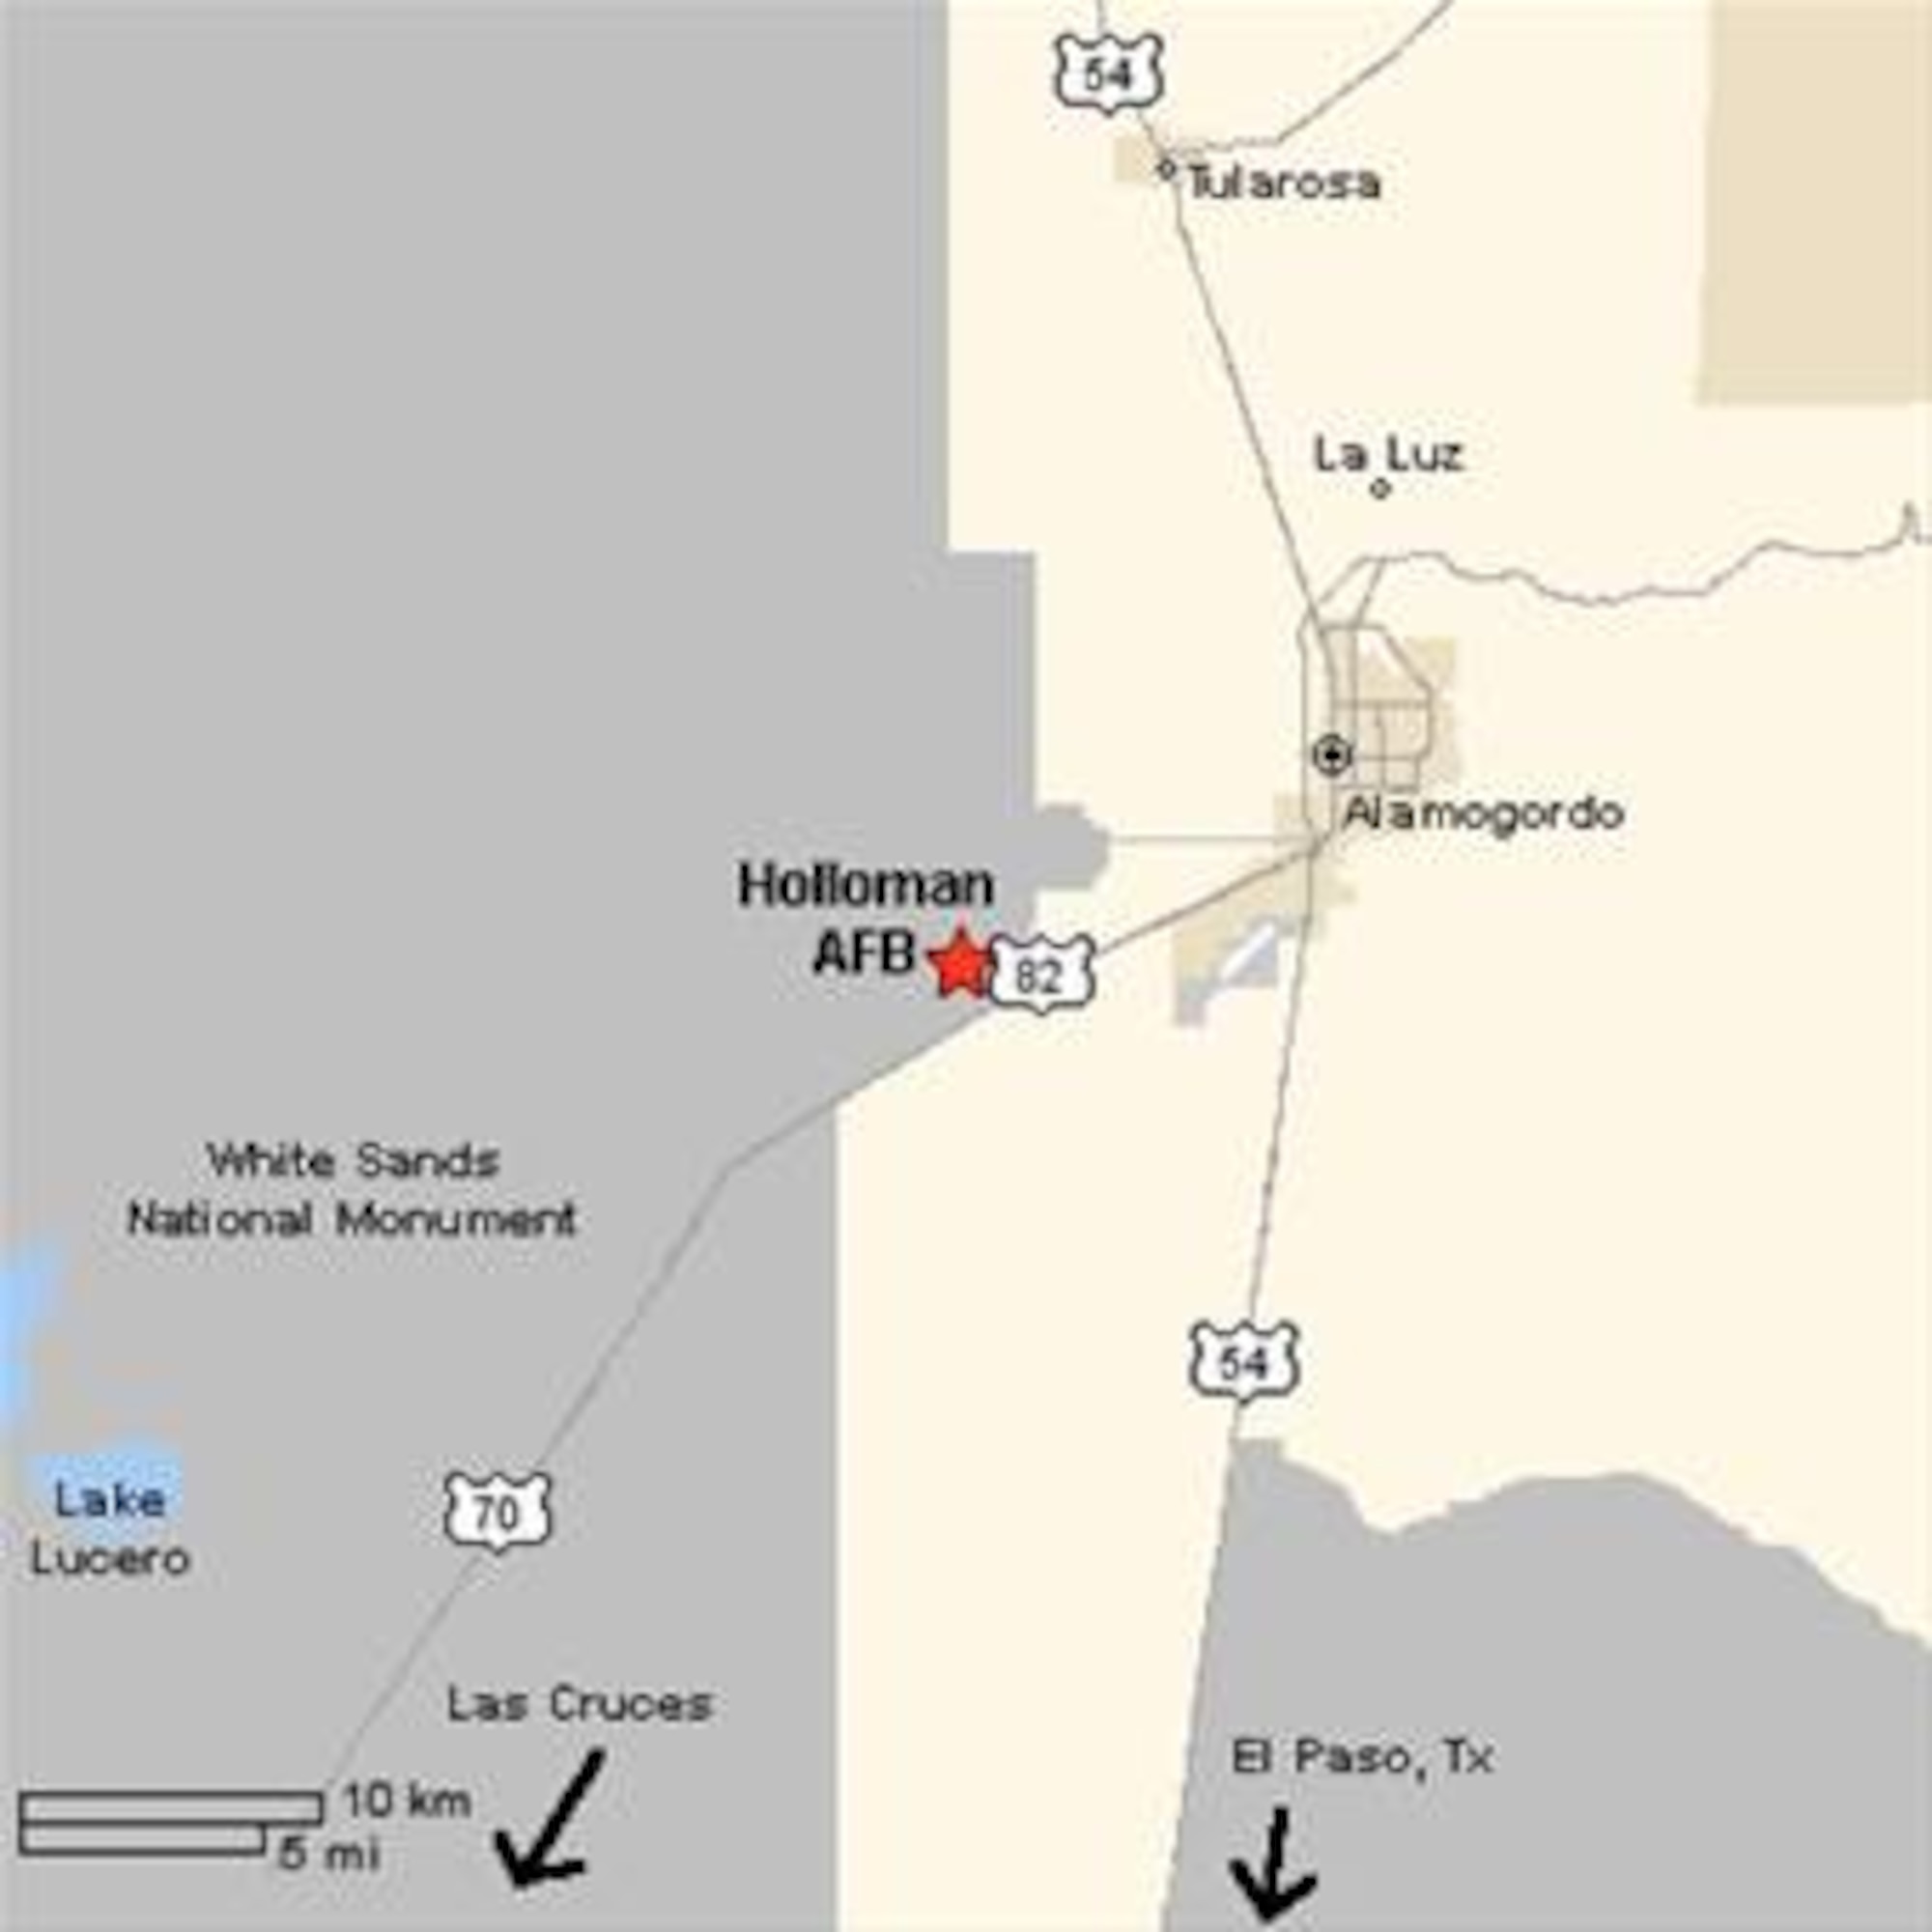 Directions to Holloman Air Force Base, New Mexico